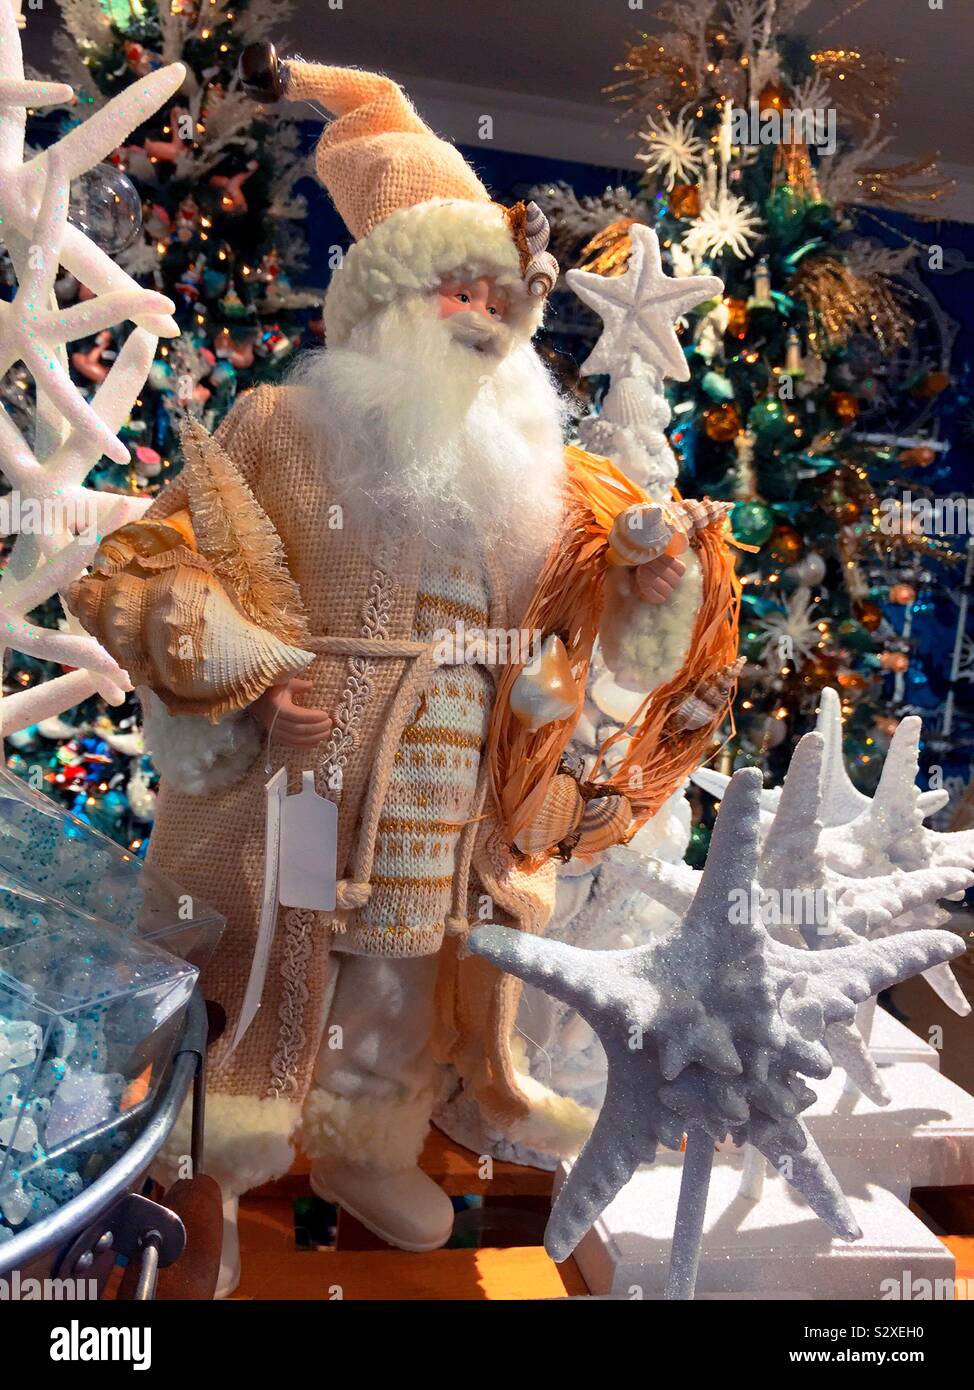 Macy’s holiday Lane features elaborate Christmas ornaments and Santa Claus figurines, New York City, USA Stock Photo